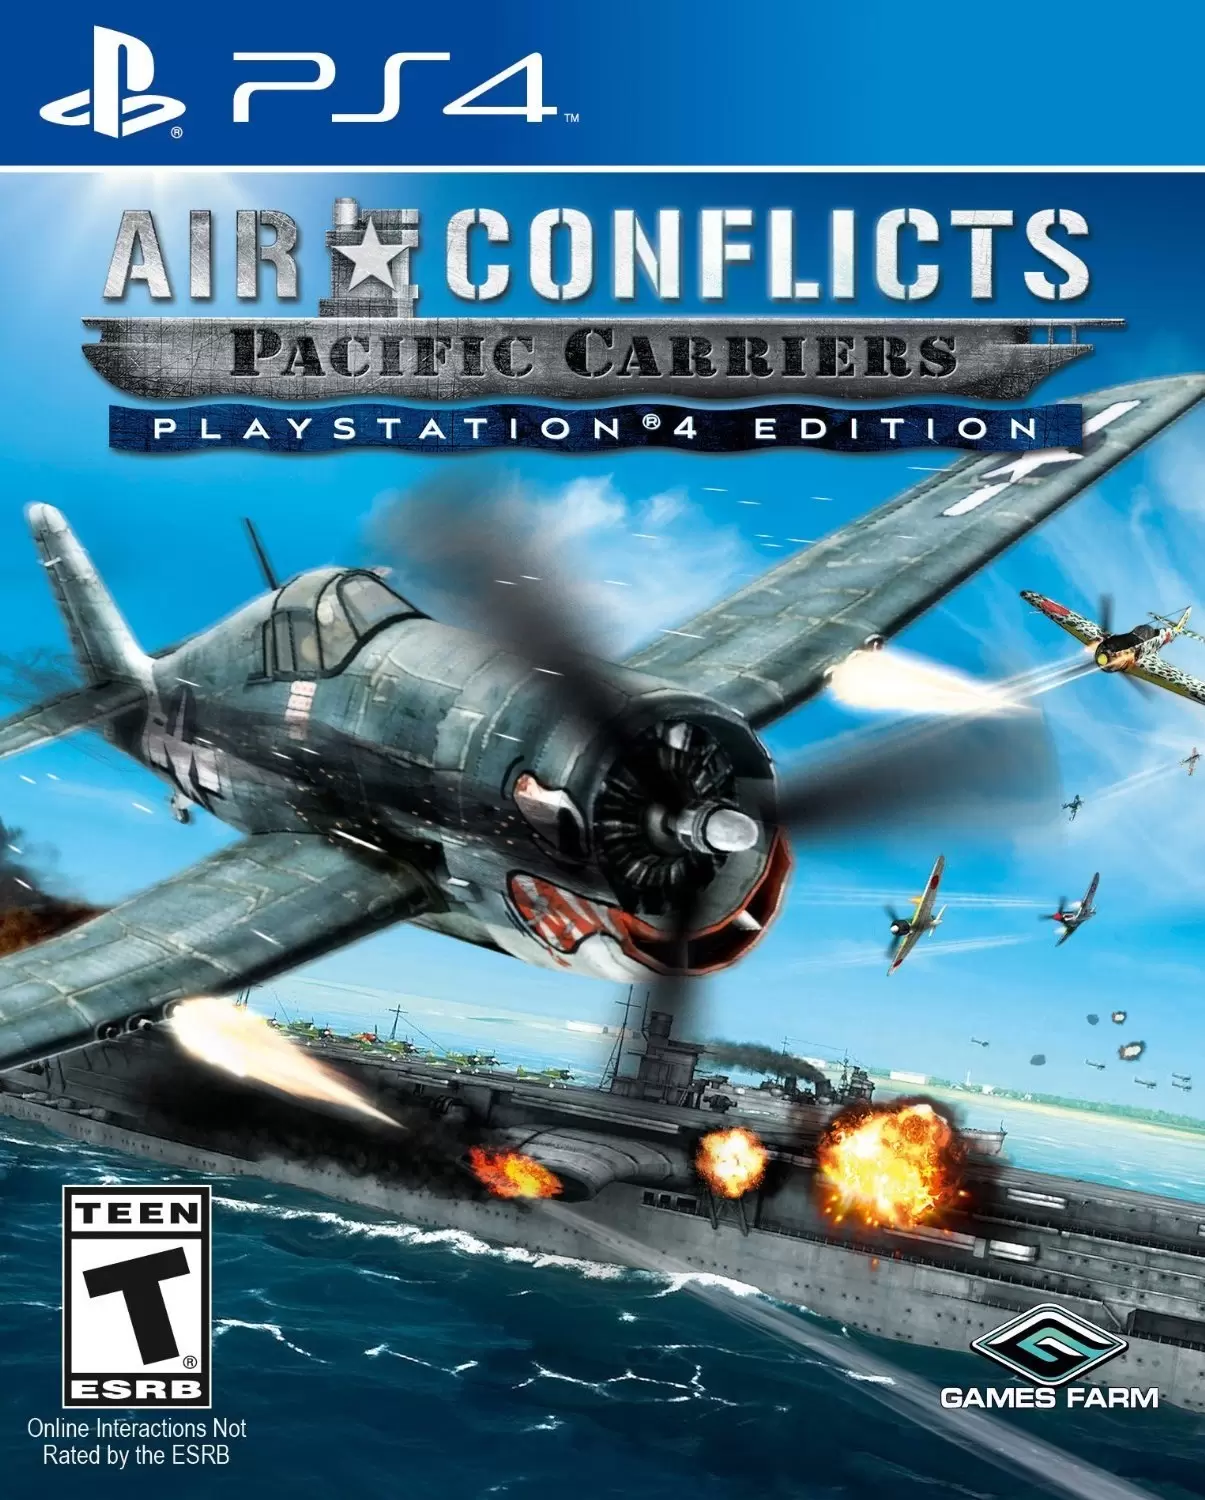 PS4 Games - Air Conflicts: Pacific Carriers